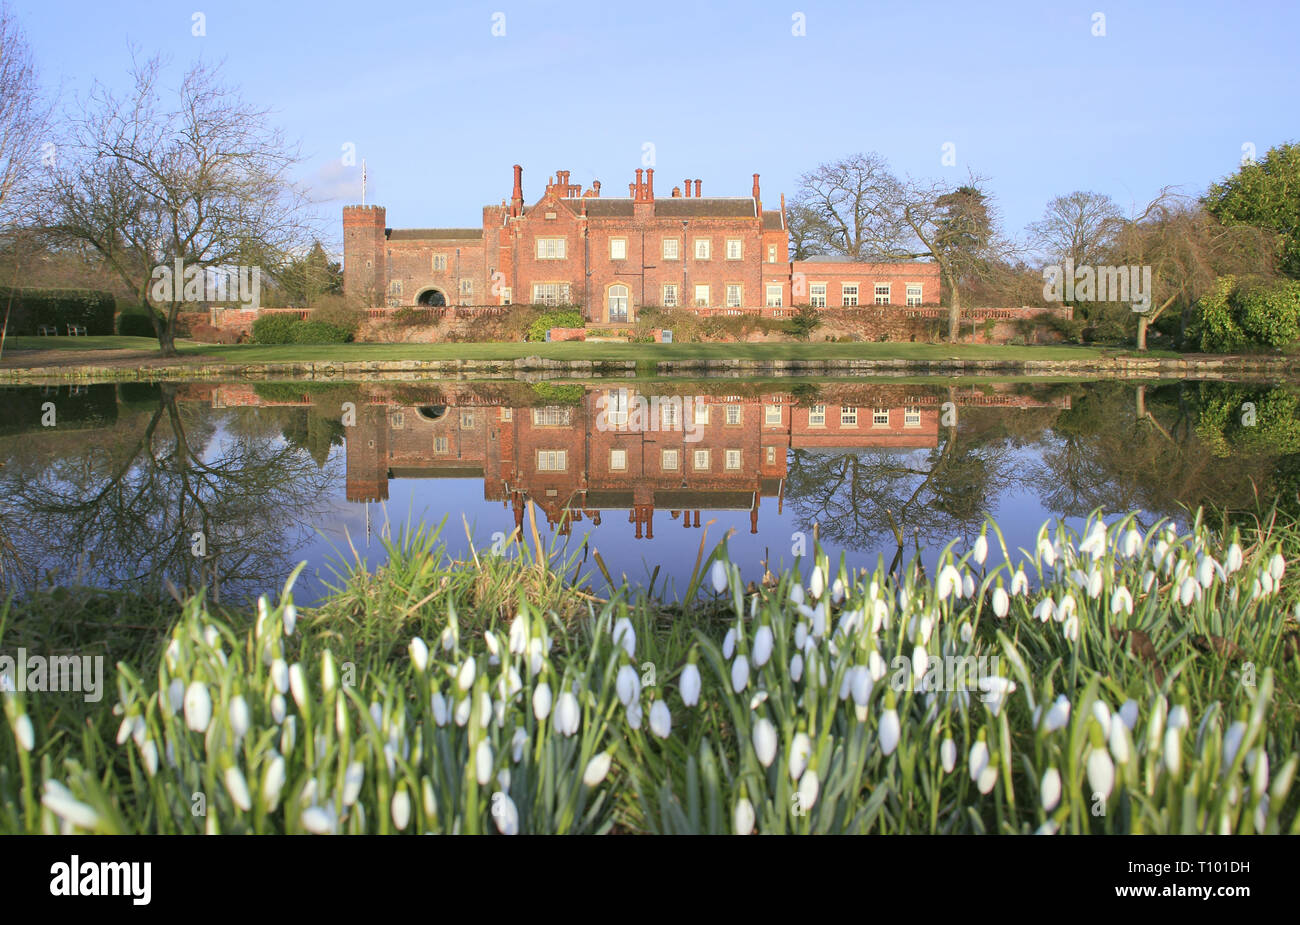 Hodsock Priory near Blyth, Nottinghamshire during their annual Snowdrop Week opening - February, UK, GB Stock Photo